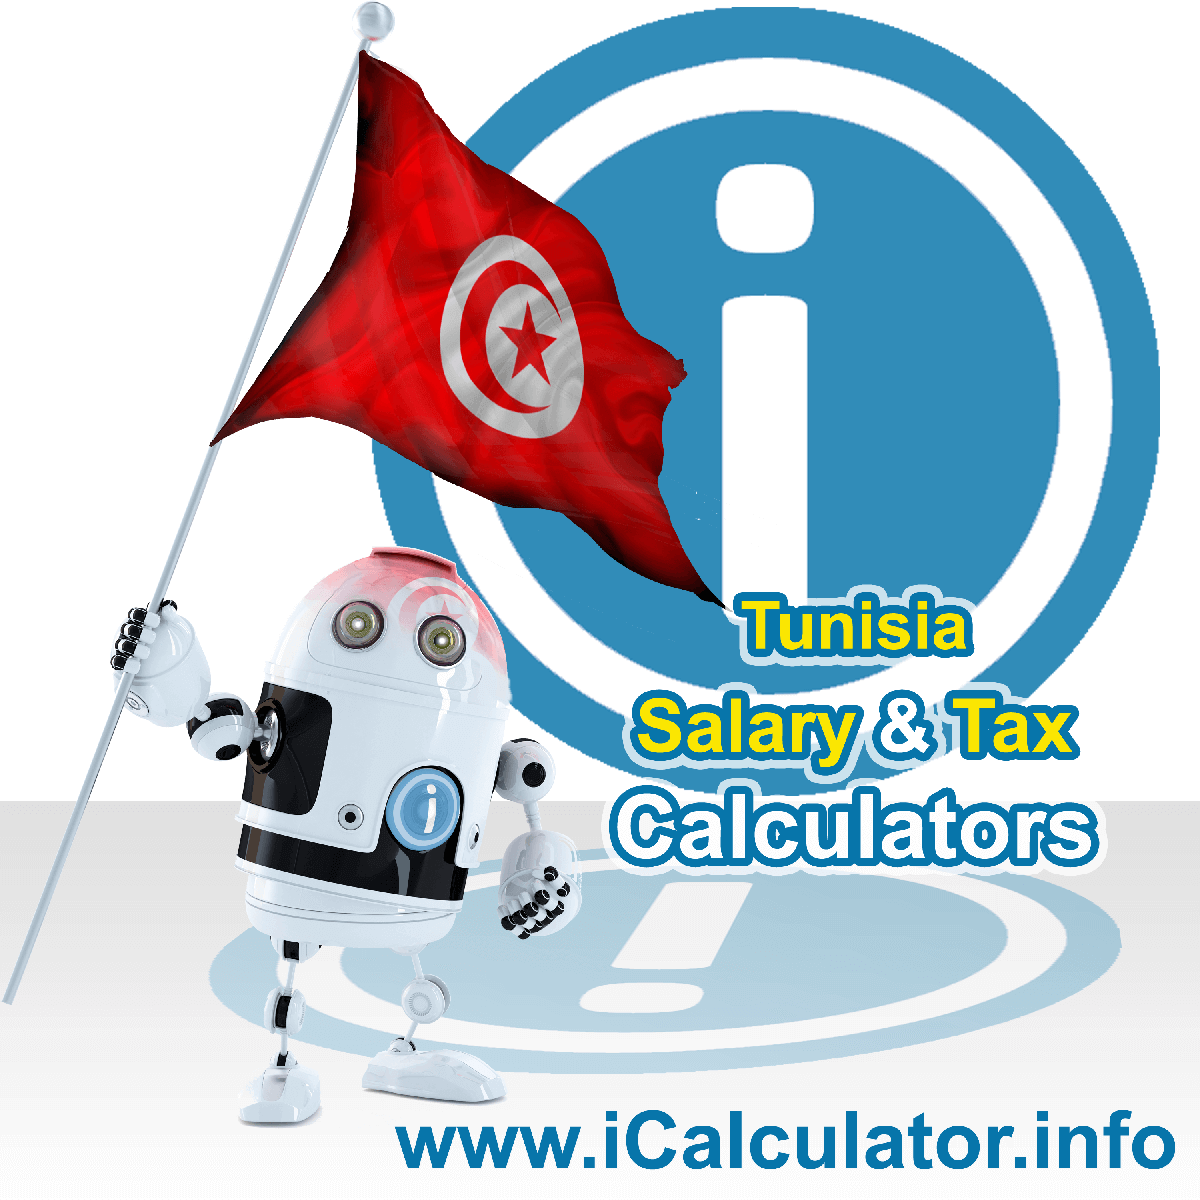 Tunisia Tax Calculator. This image shows the Tunisia flag and information relating to the tax formula for the Tunisia Salary Calculator